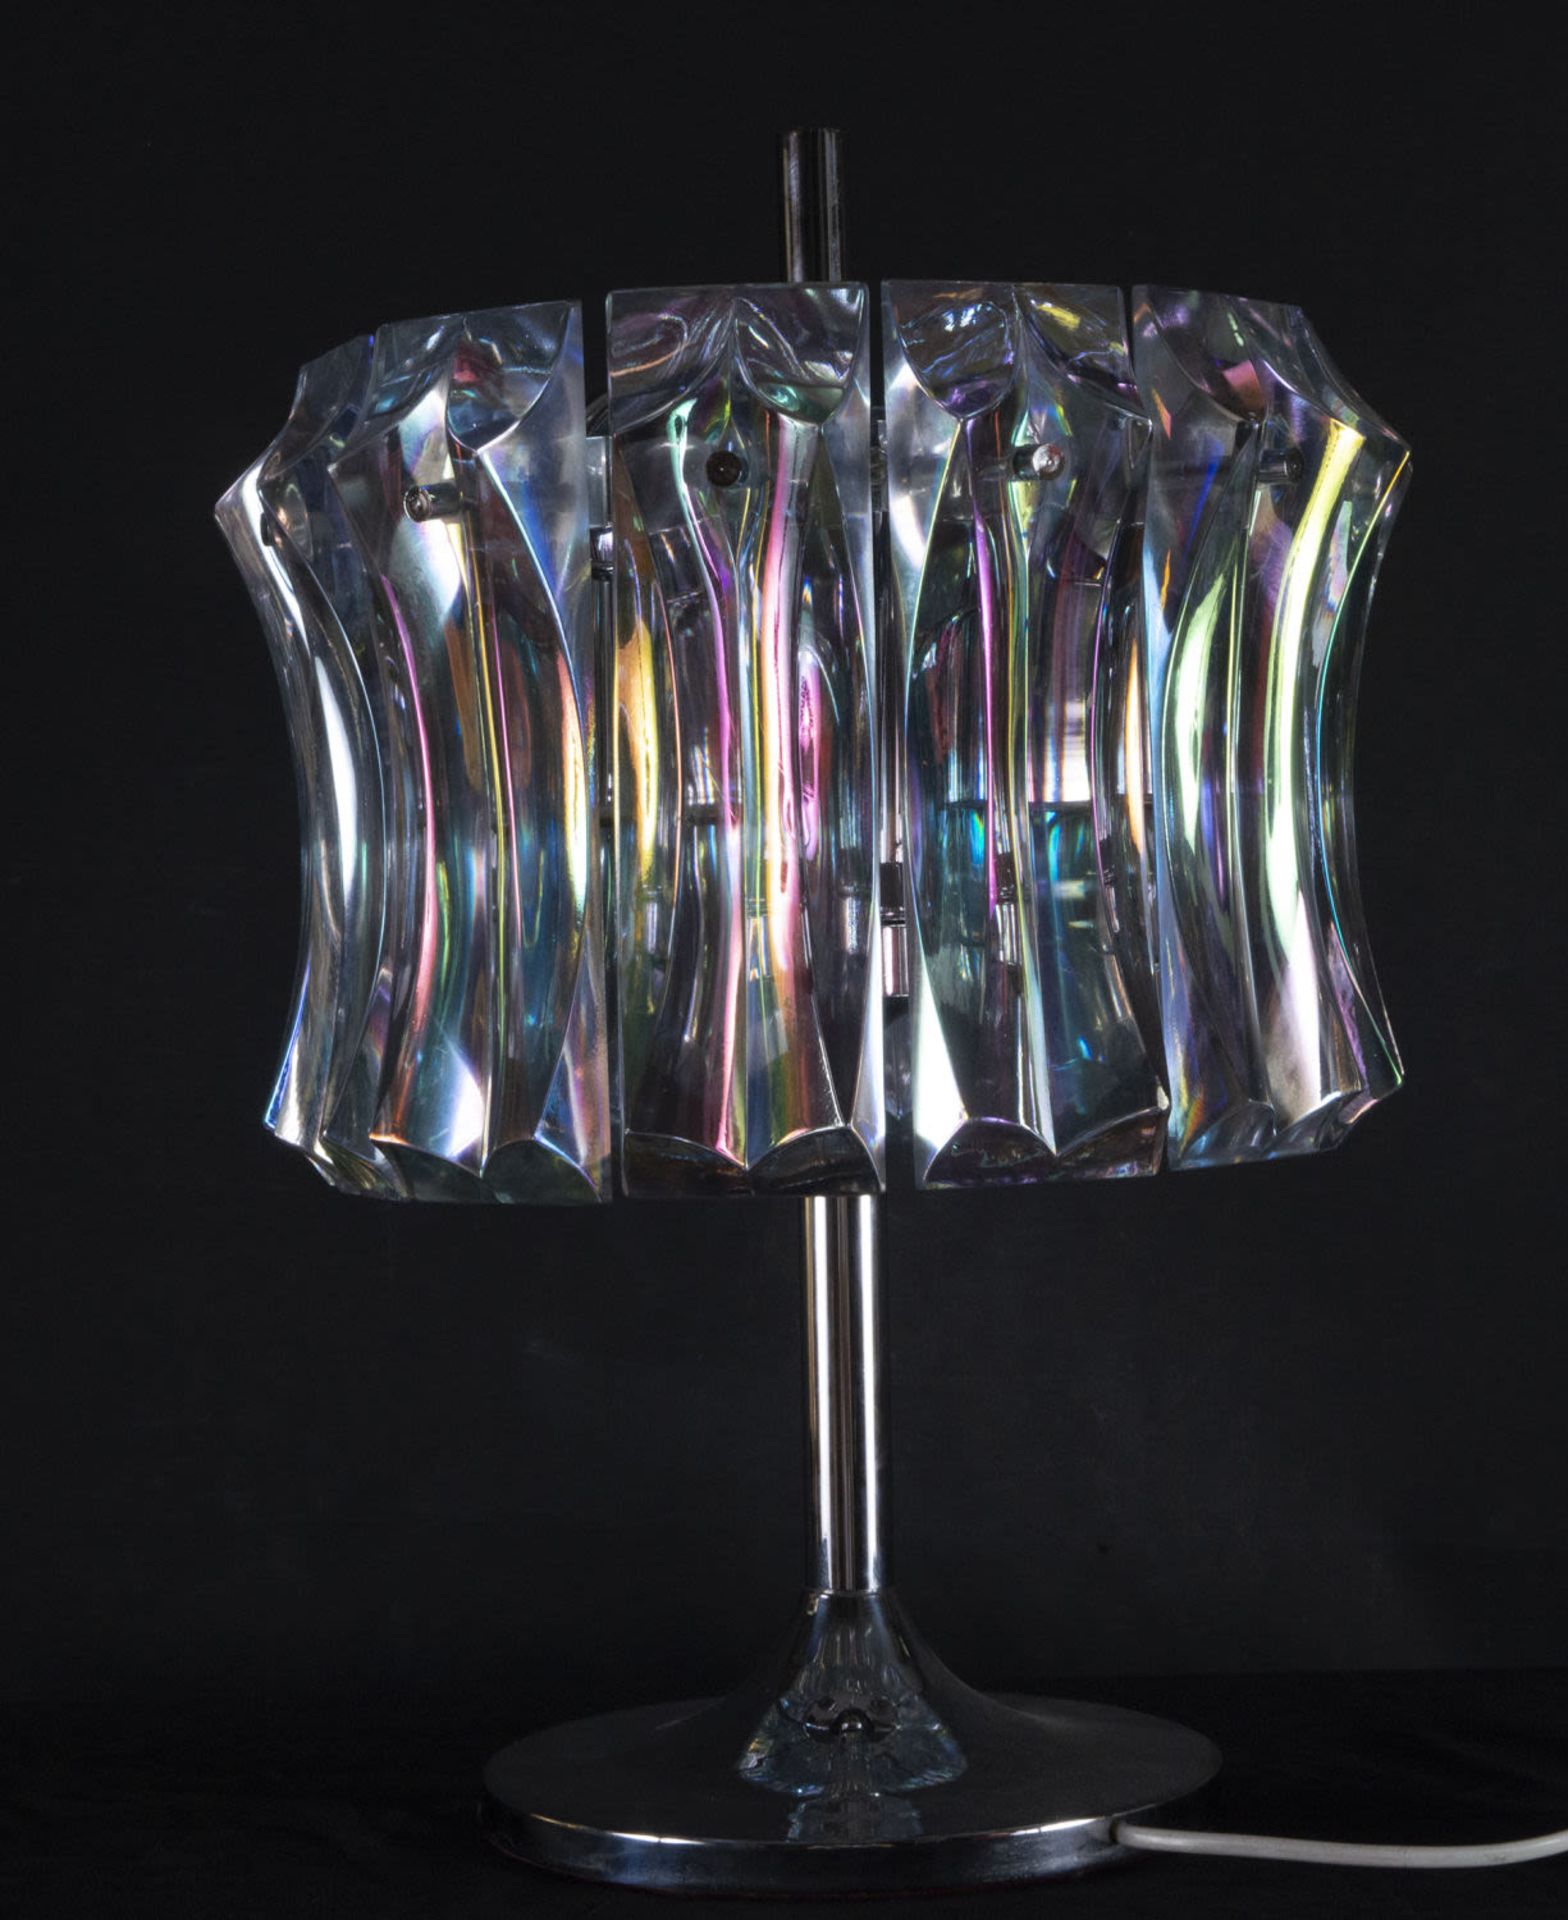 Deco style Murano glass table lamp, 1950s - Image 2 of 3